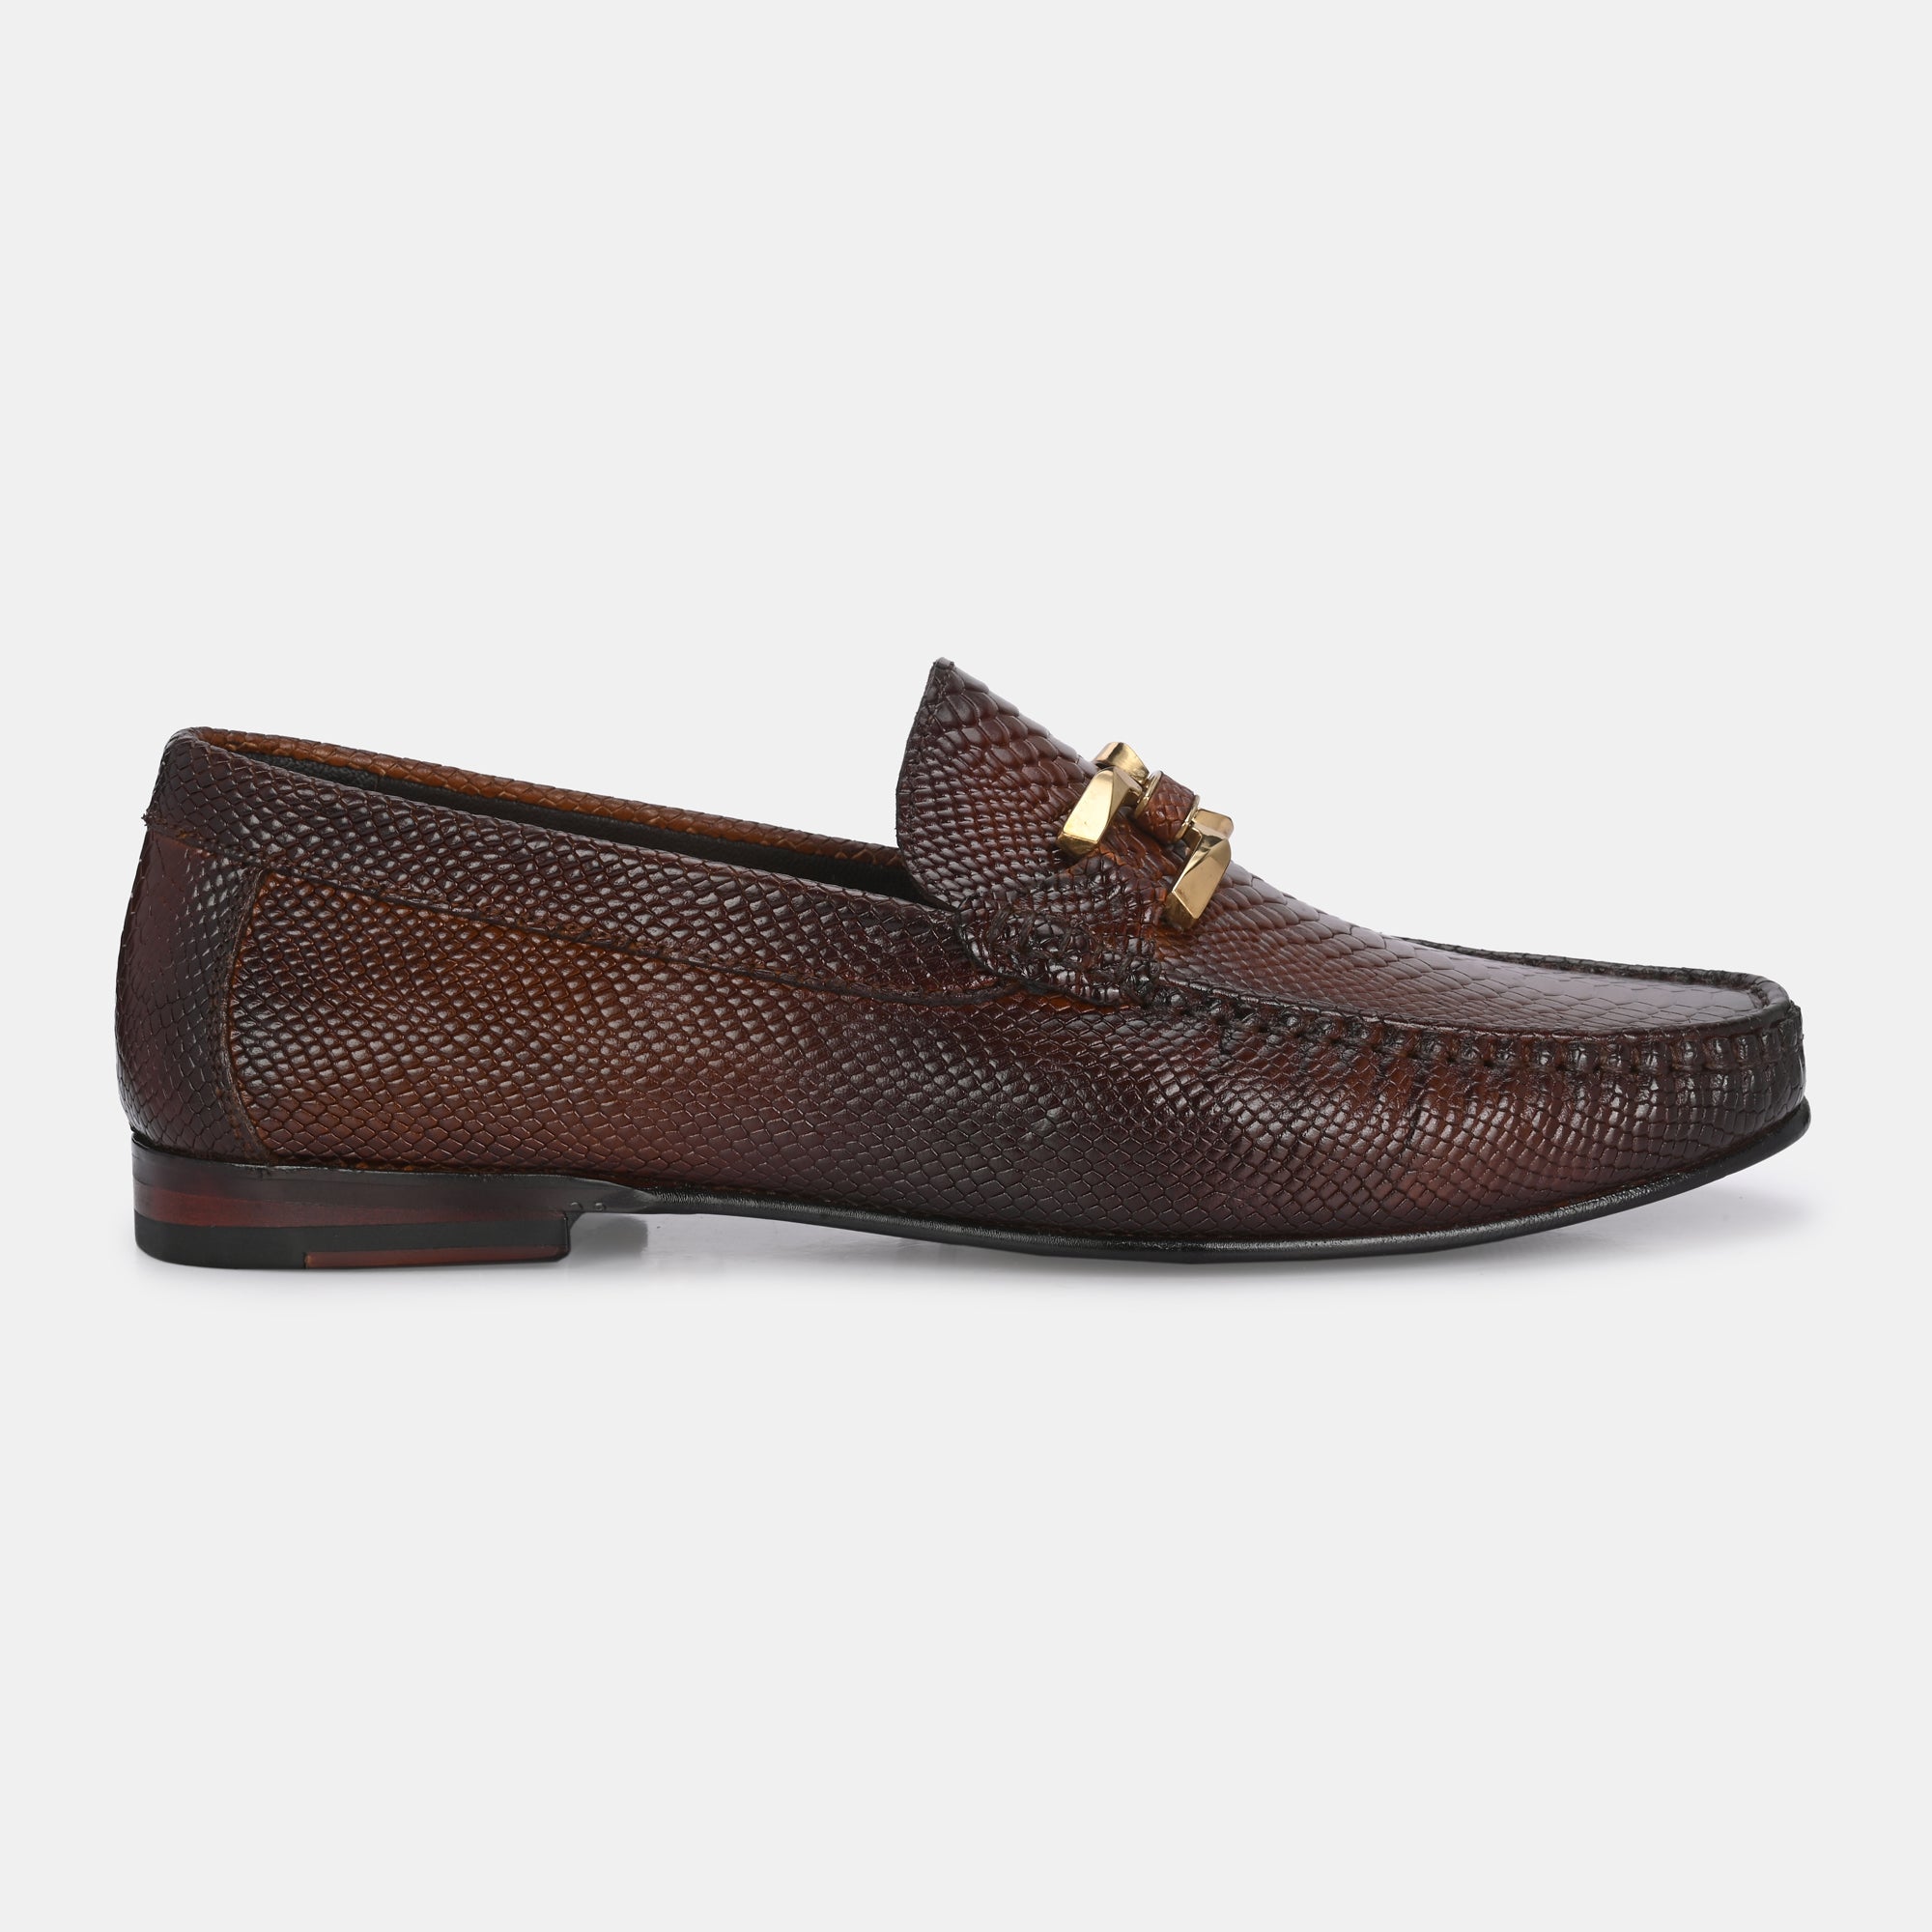 Tan Imprinted Buckled Loafers by Lafattio